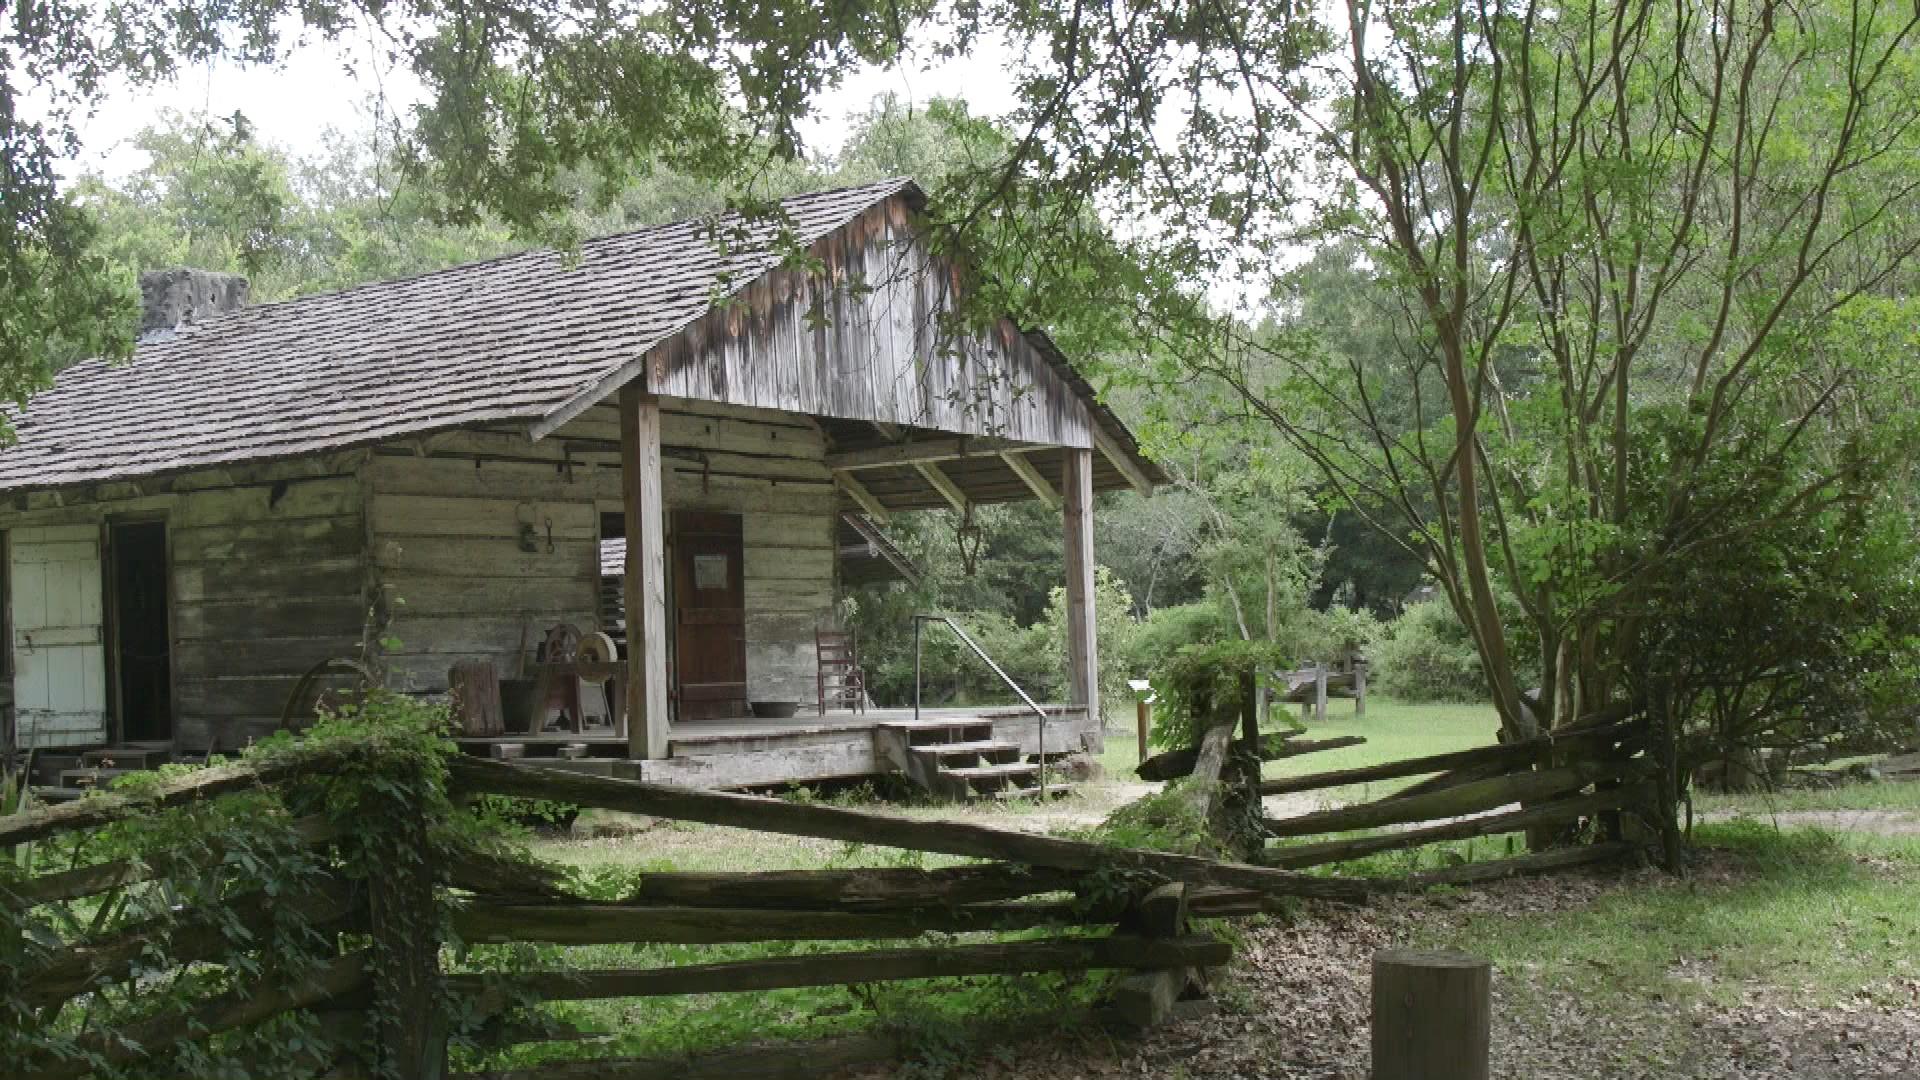 building at the LSU Rural Life Museum in Baton Rogue